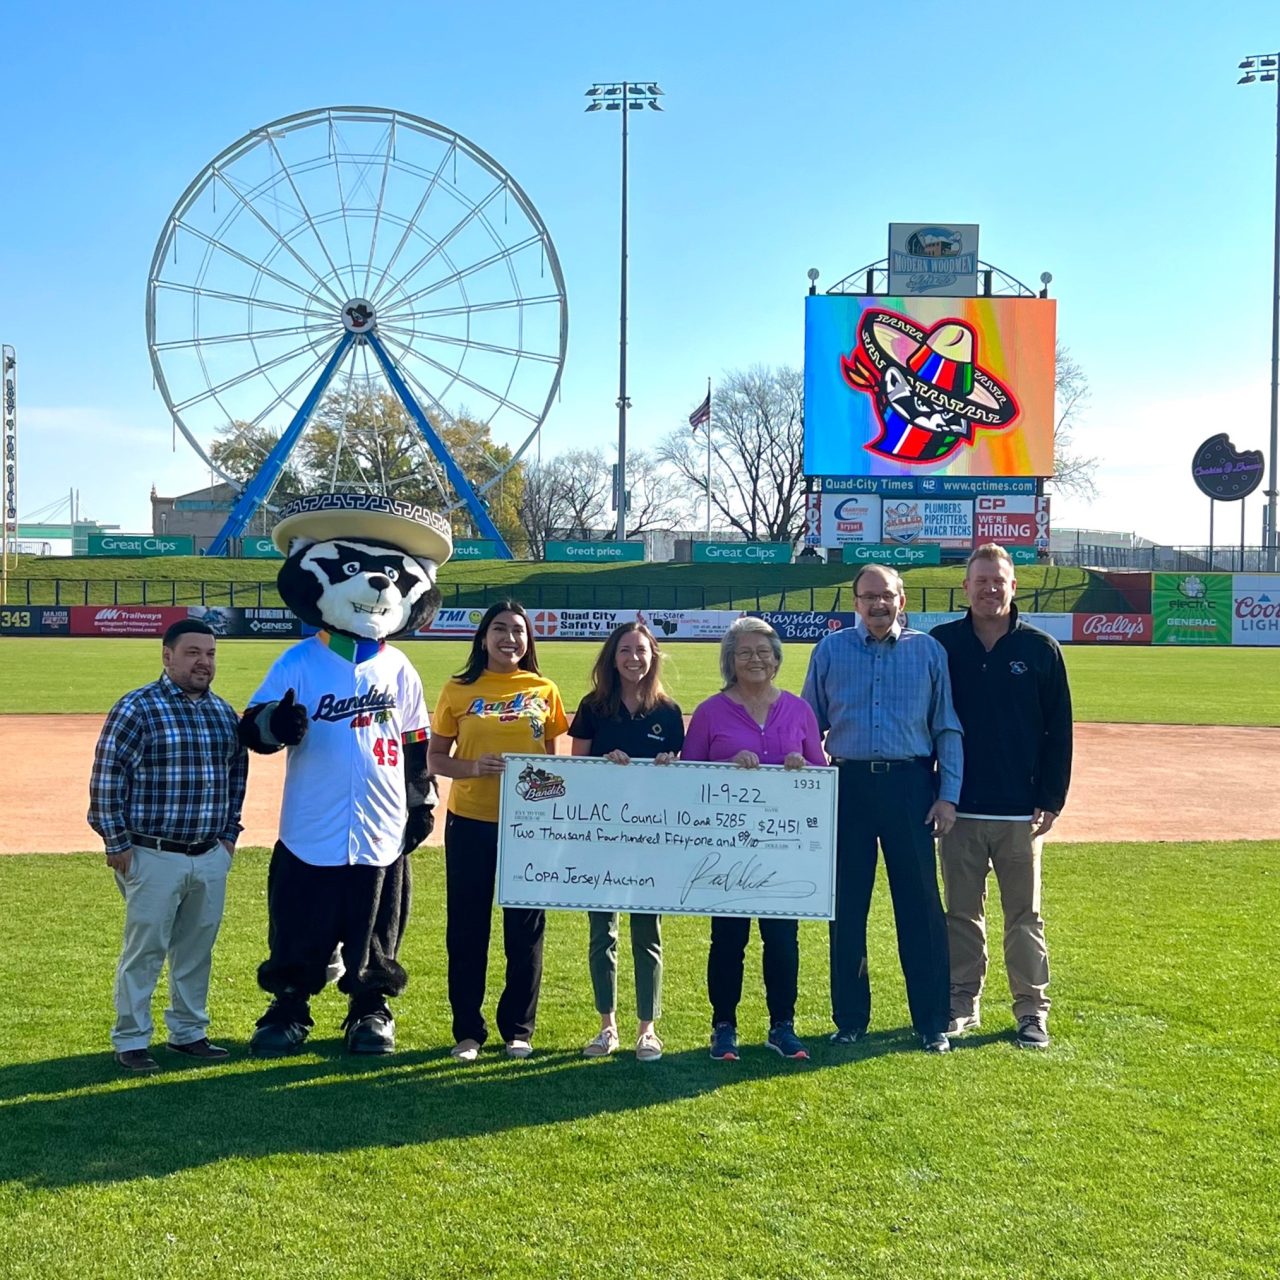 River Bandits partnering with Group O to celebrate diversity and community